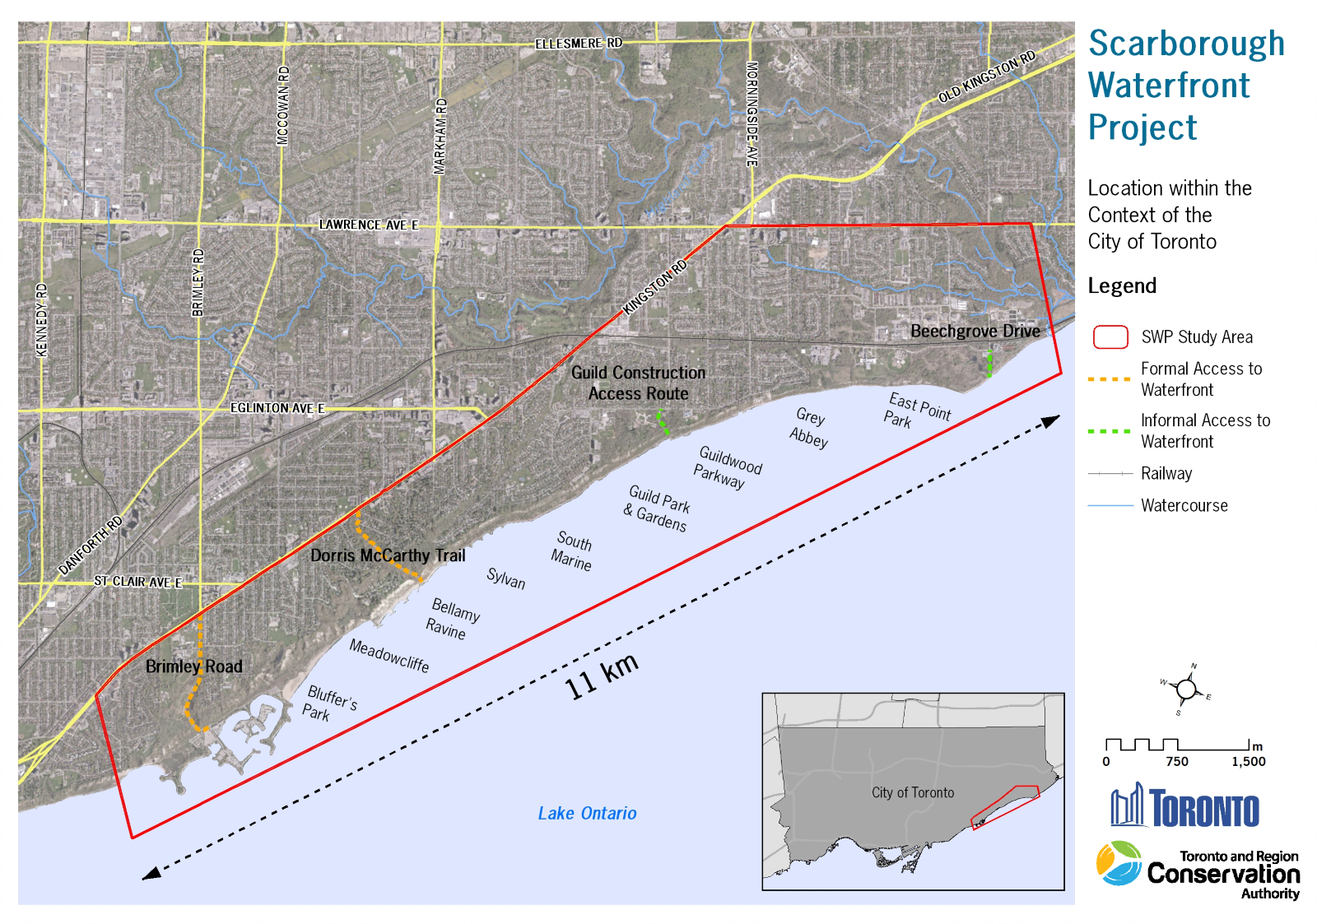 Project Area Map (within Context of City of Toronto)